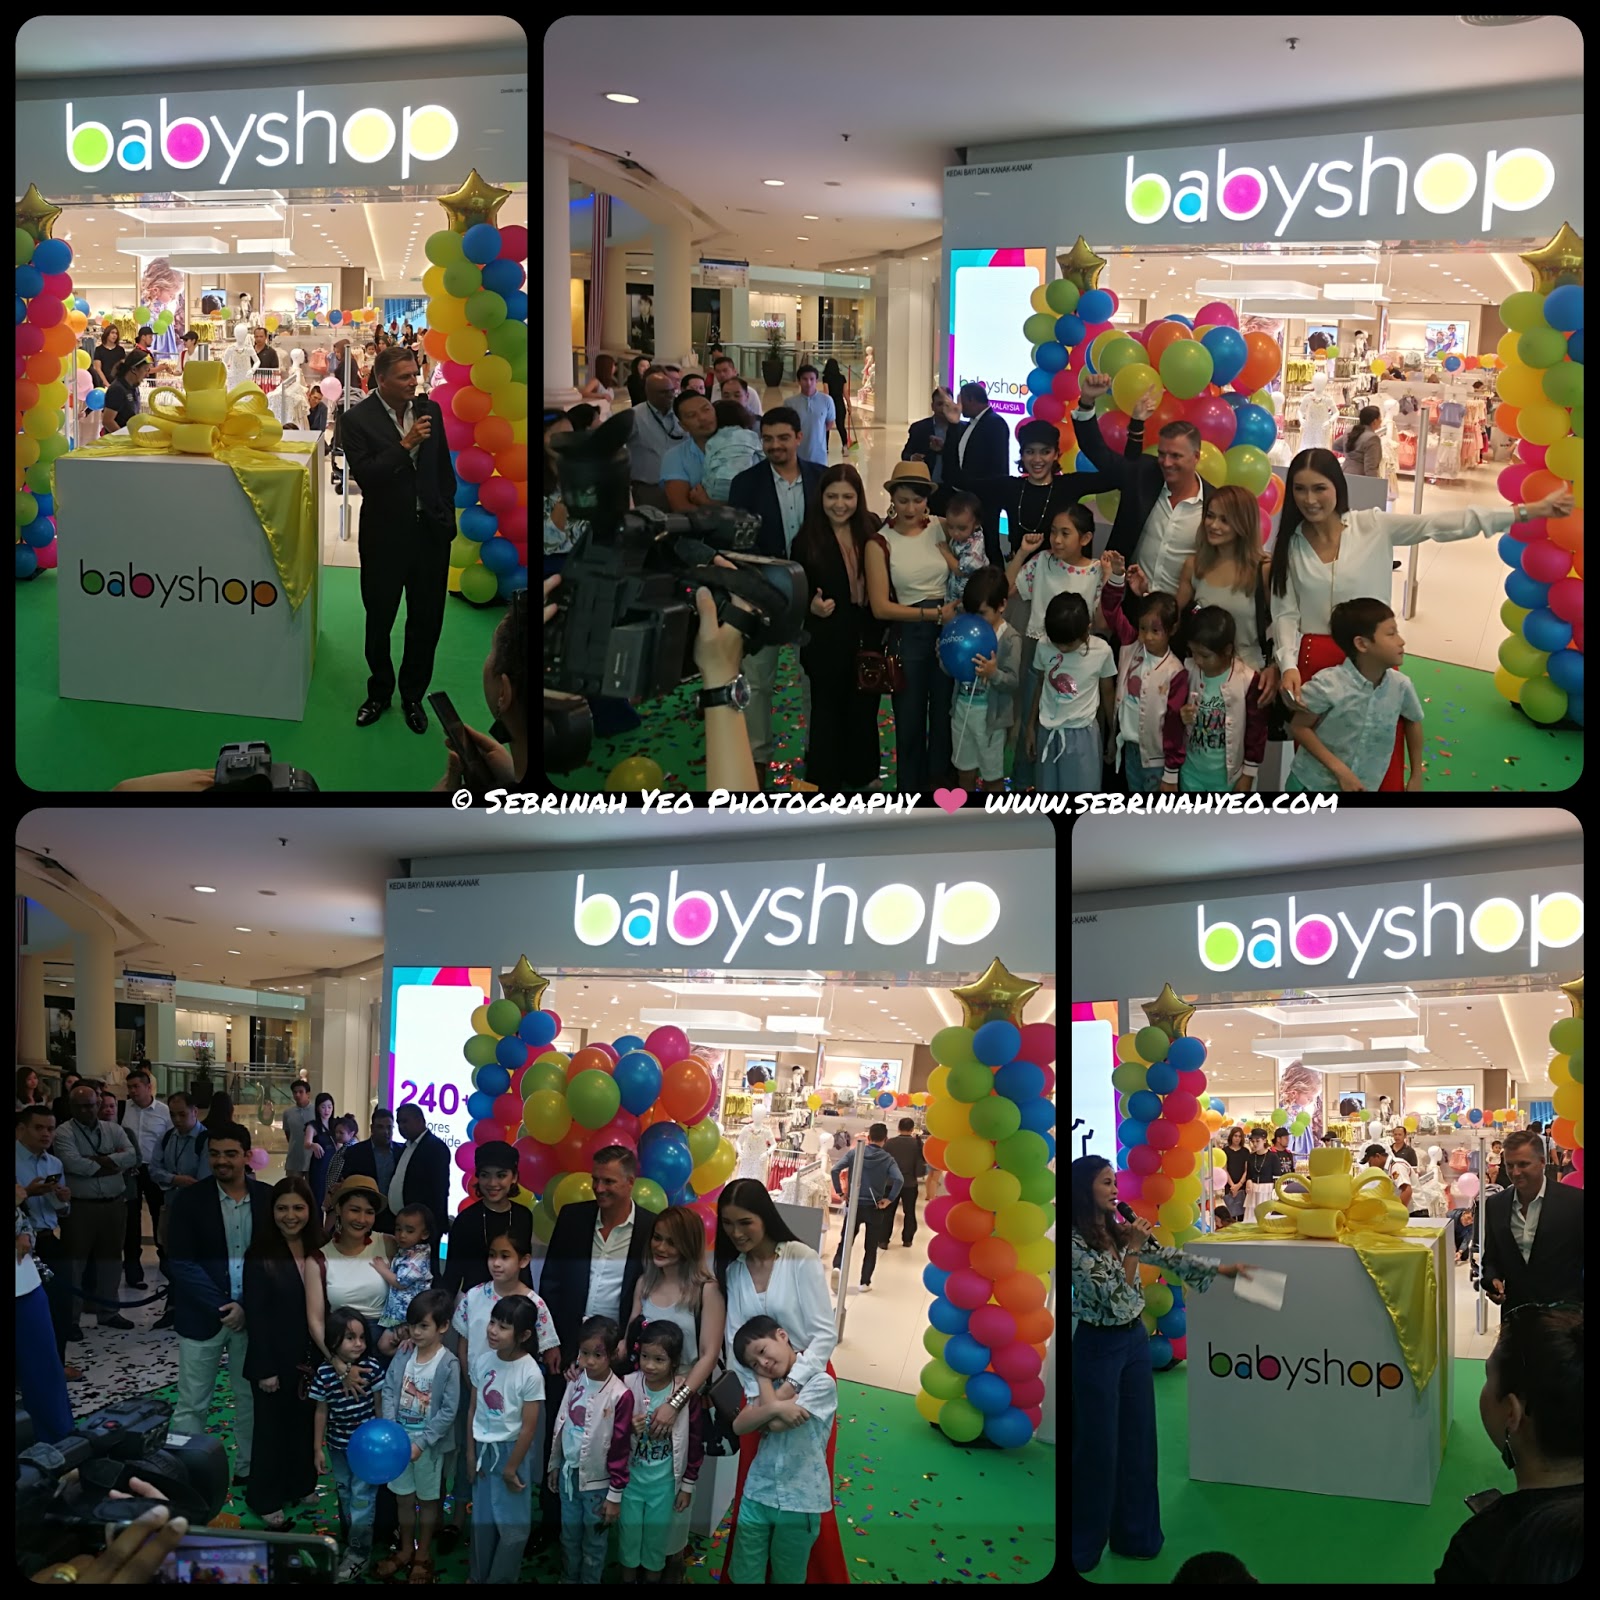 Babyshop, Your One-Stop Shop in Malaysia! - Sebrinah Yeo